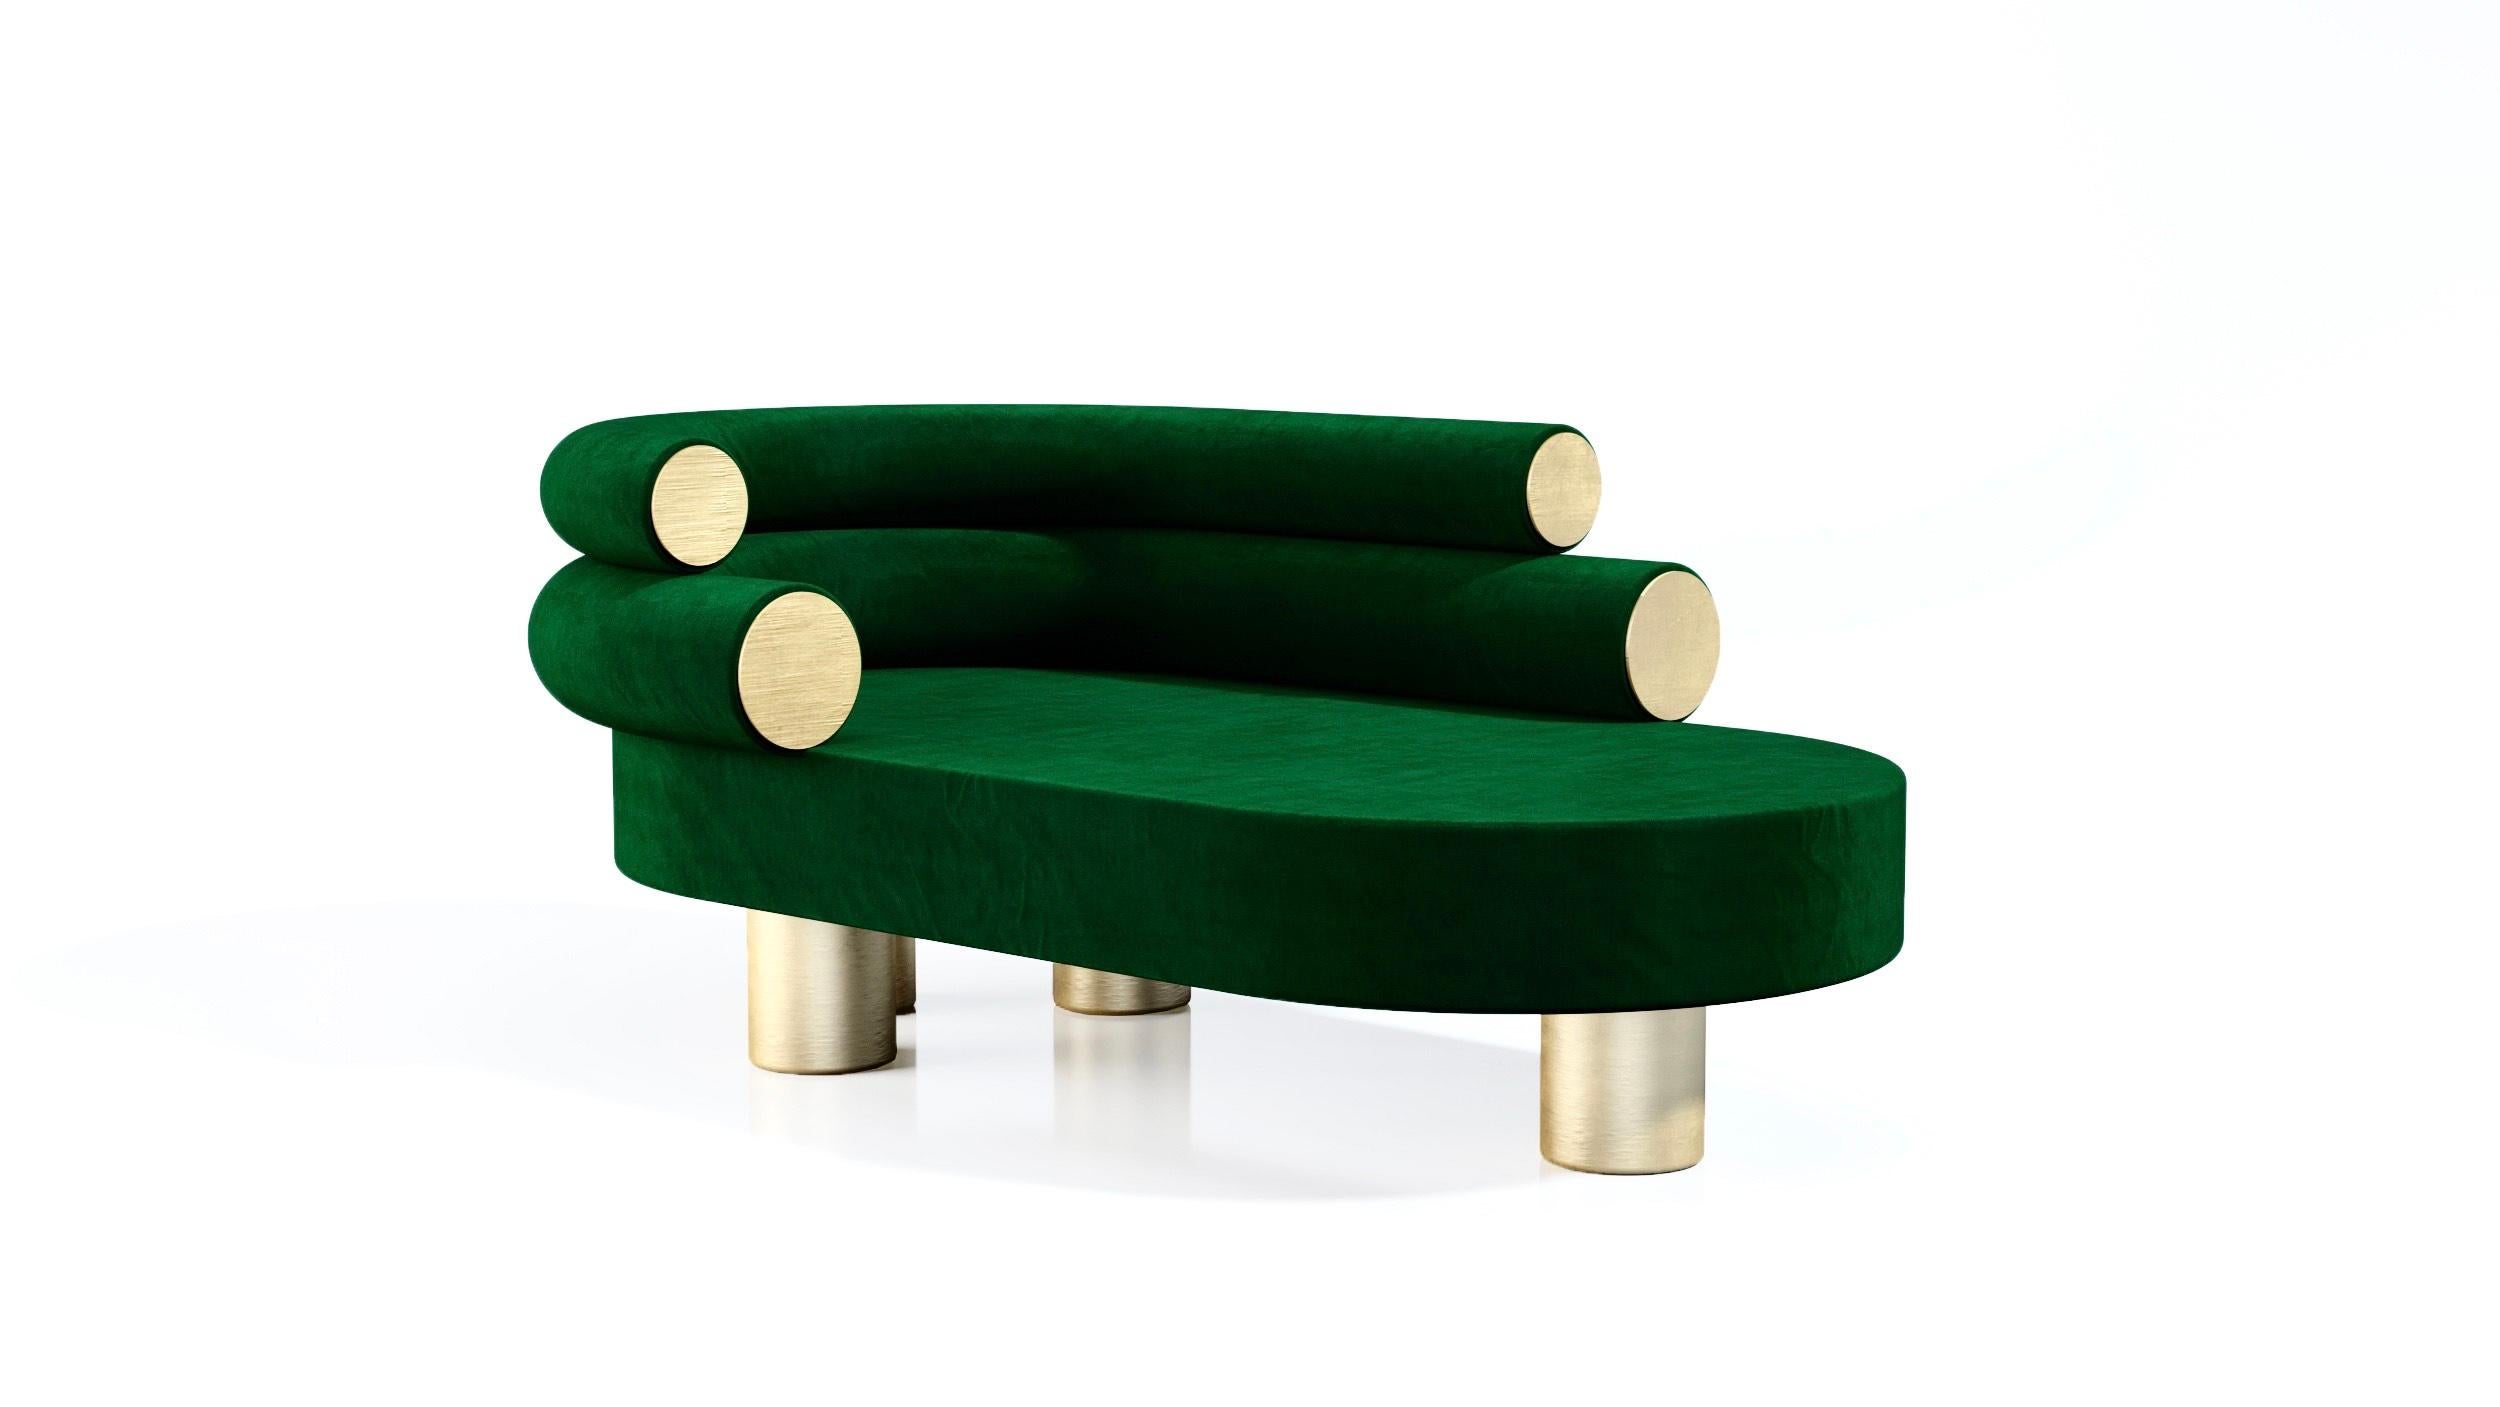 Green and Brass Mineral Chaise Longue by Kasadamo
Dimensions: D 185 x W 100 x H 78 cm
Materials: Suede, brass
Also Available: Customized materials and colors available,


Kasadamo is about uniqueness, visions and exclusivity, a brand that was